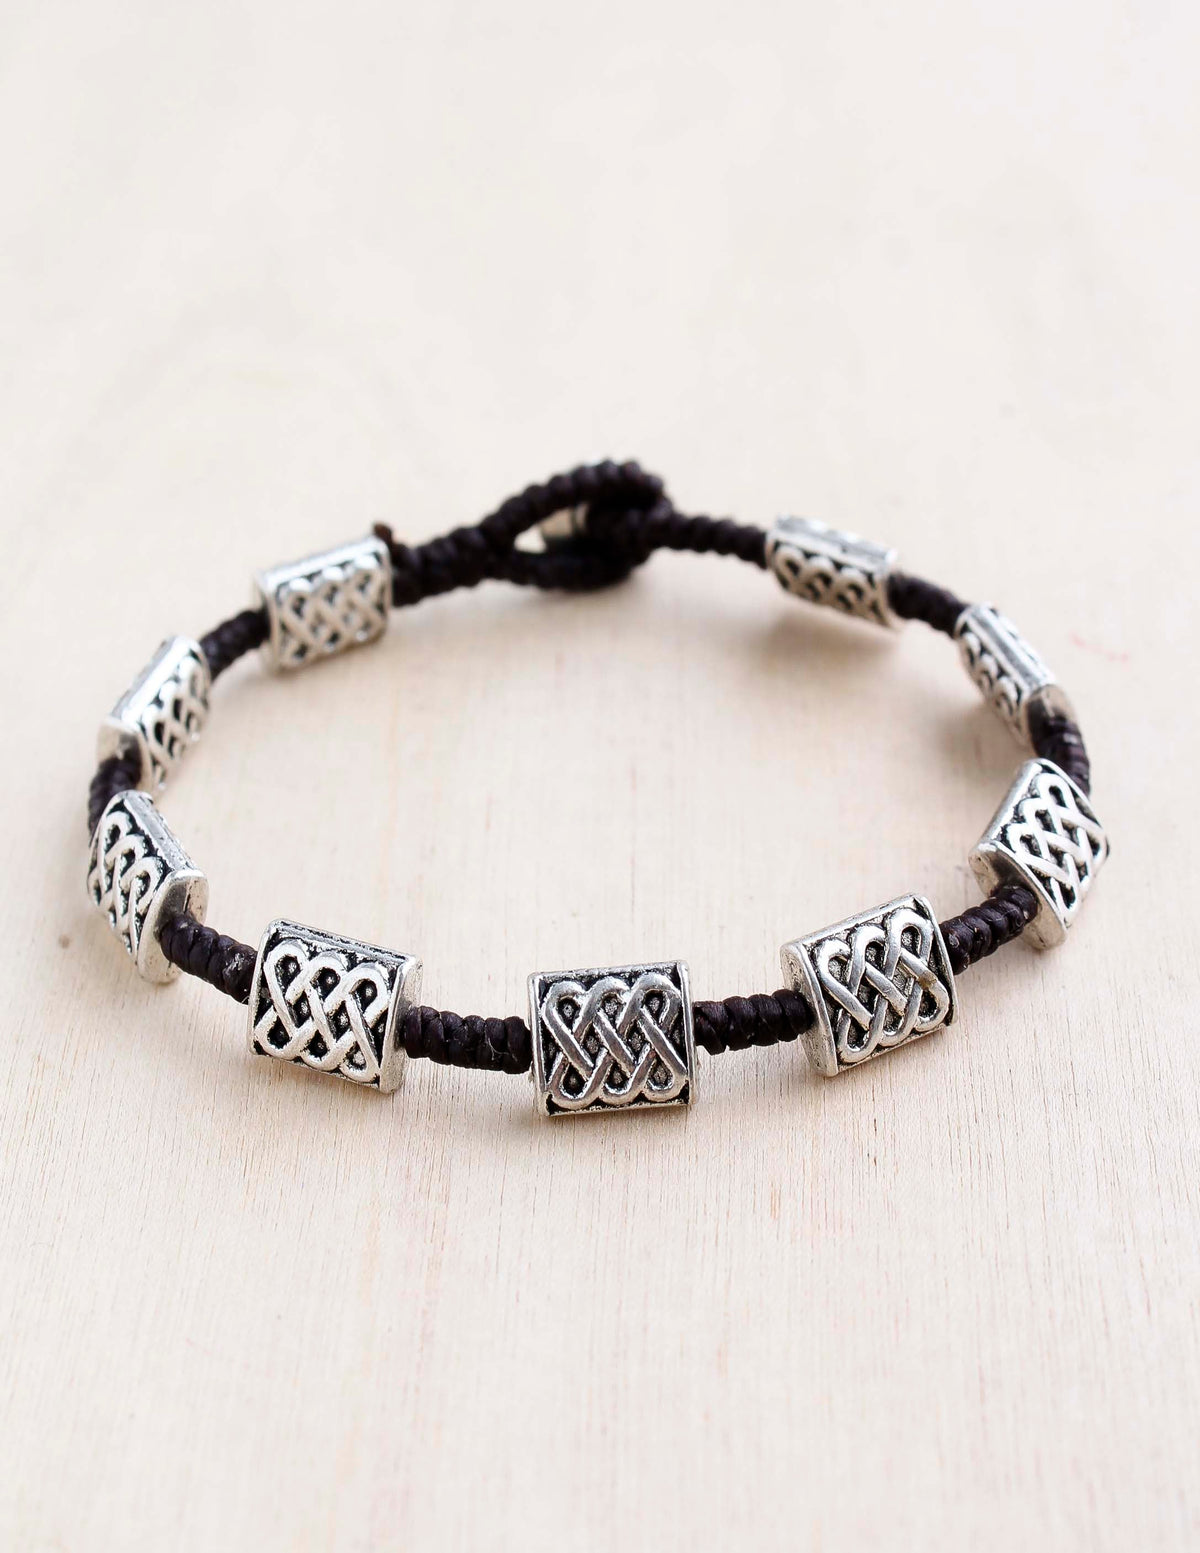  alloy, bali queen, coco rose, silver, rhodium, hypoallergenic, tribal jewelry, single strand. etched weave